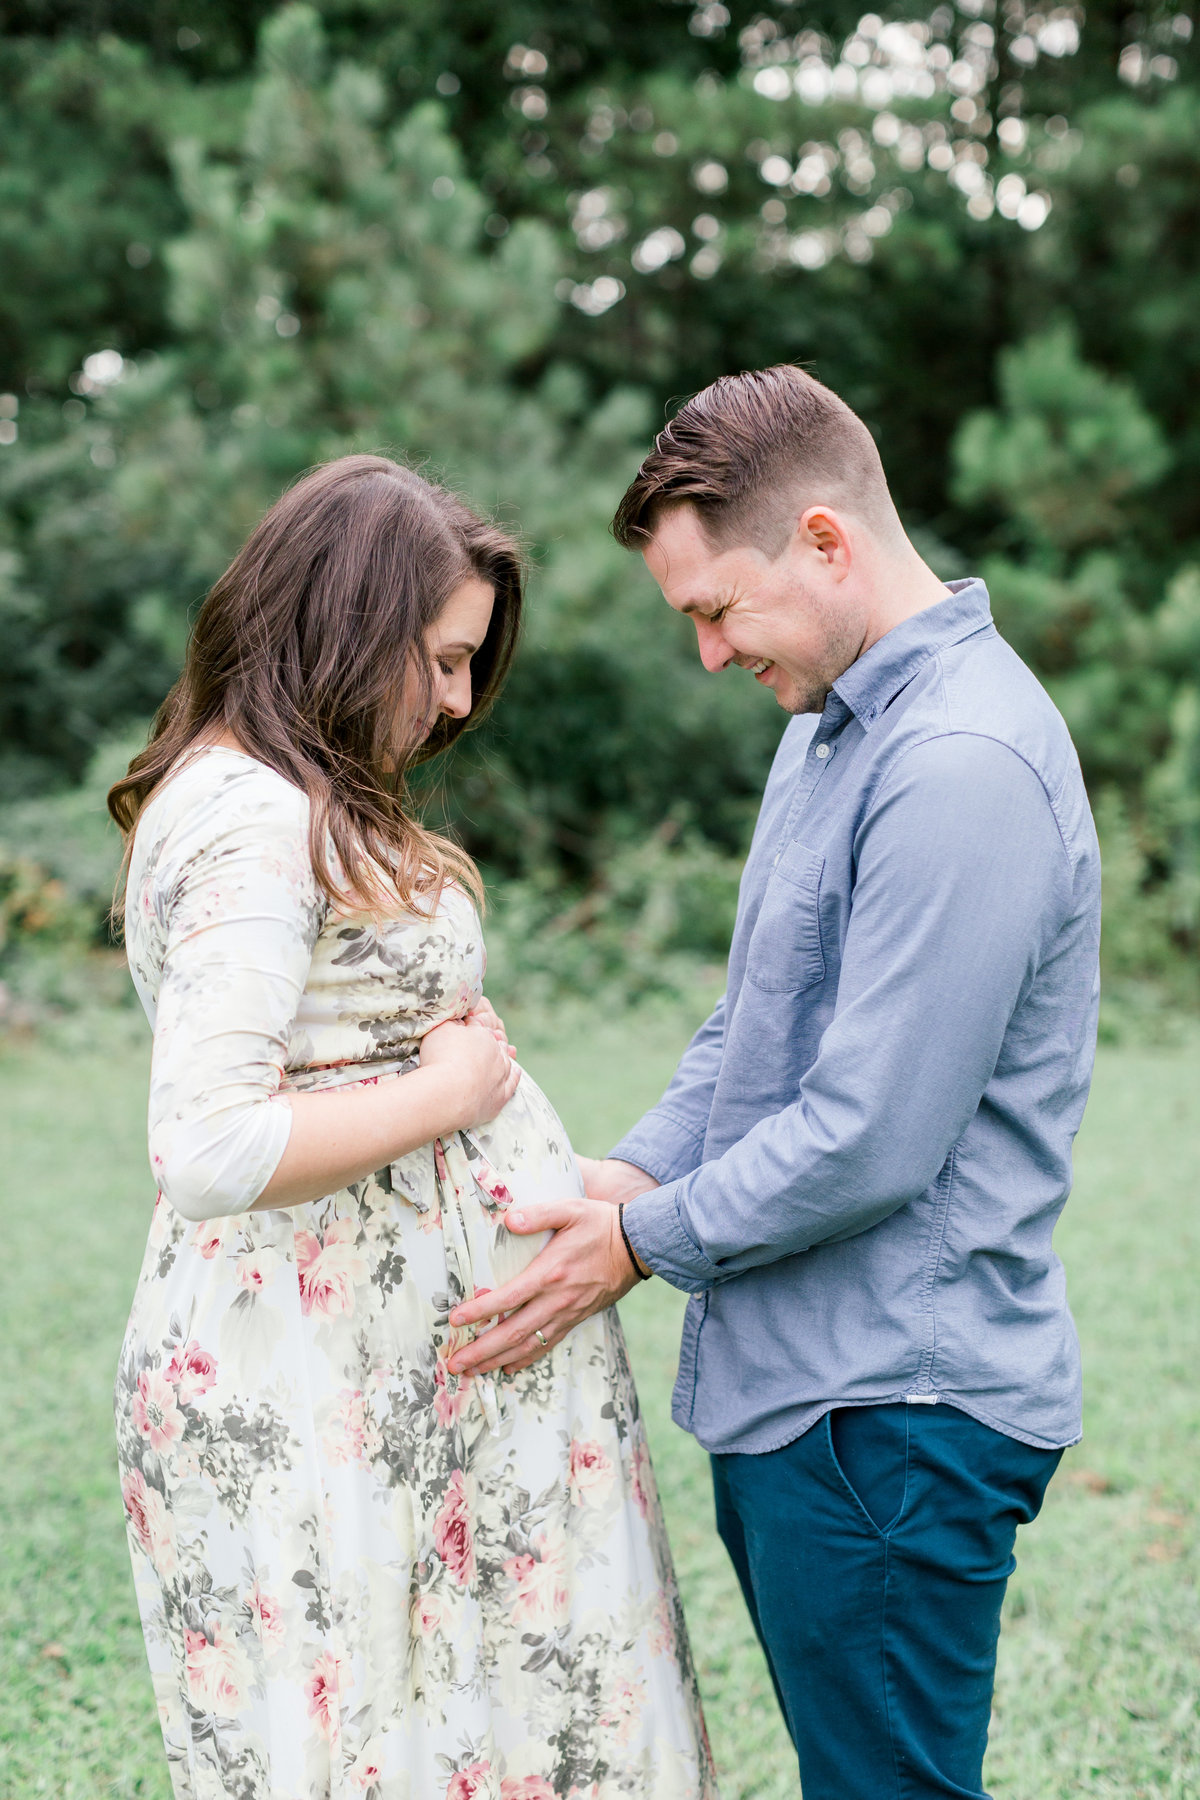 Dave and Emily-Maternity Session-Samantha Laffoon Photography-8